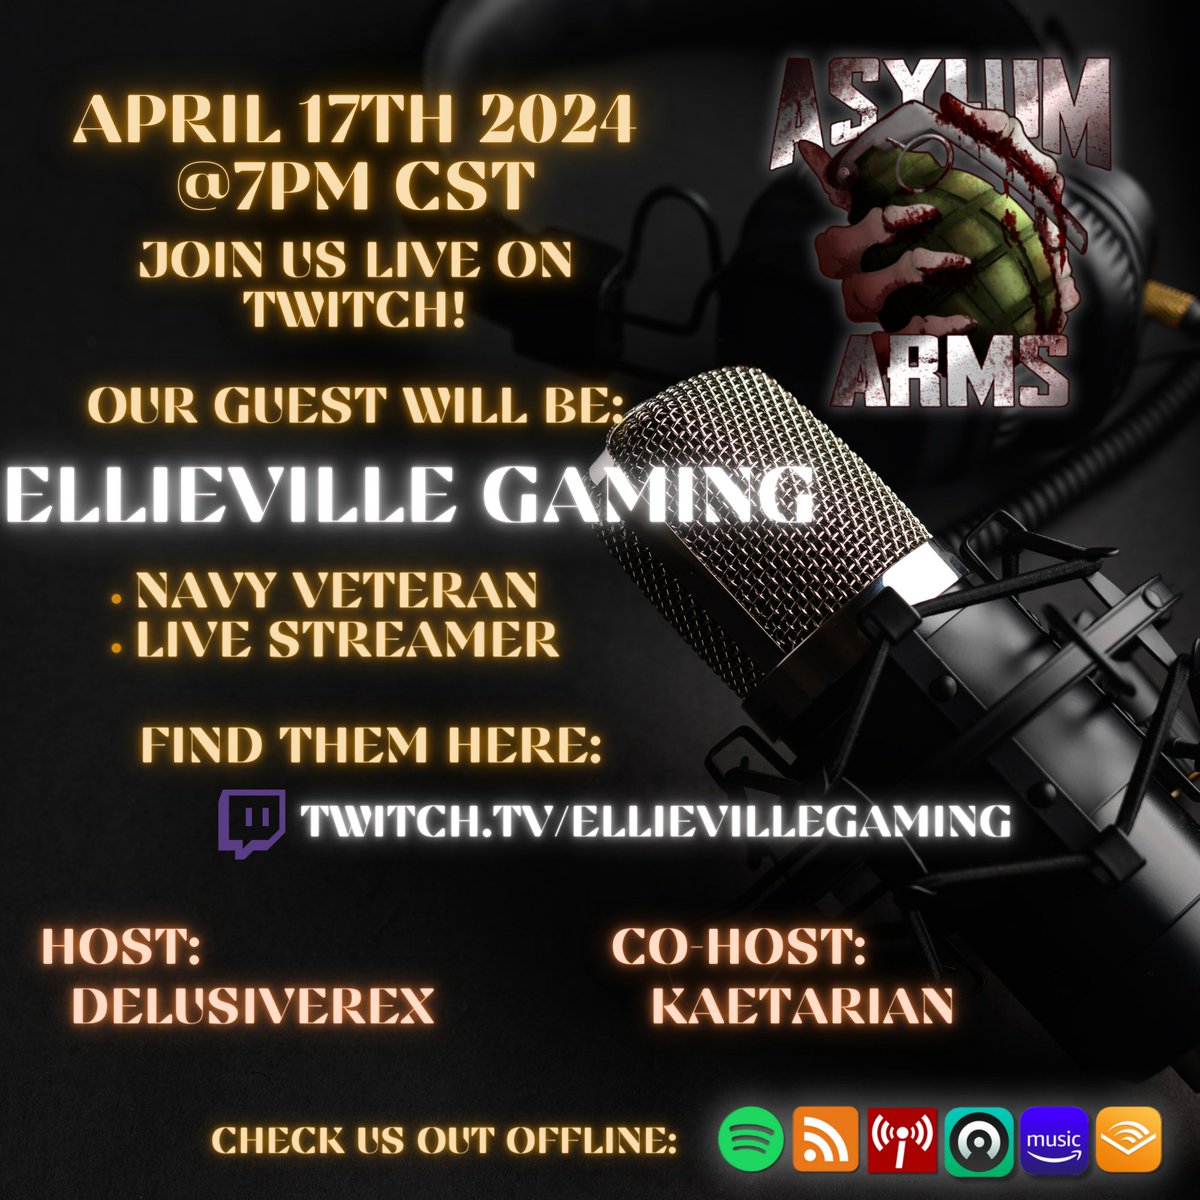 Tonight we will be interviewing @EllivilleGaming! We hope to see you all there!

#Veteran #podcast #firstresponder #activeduty